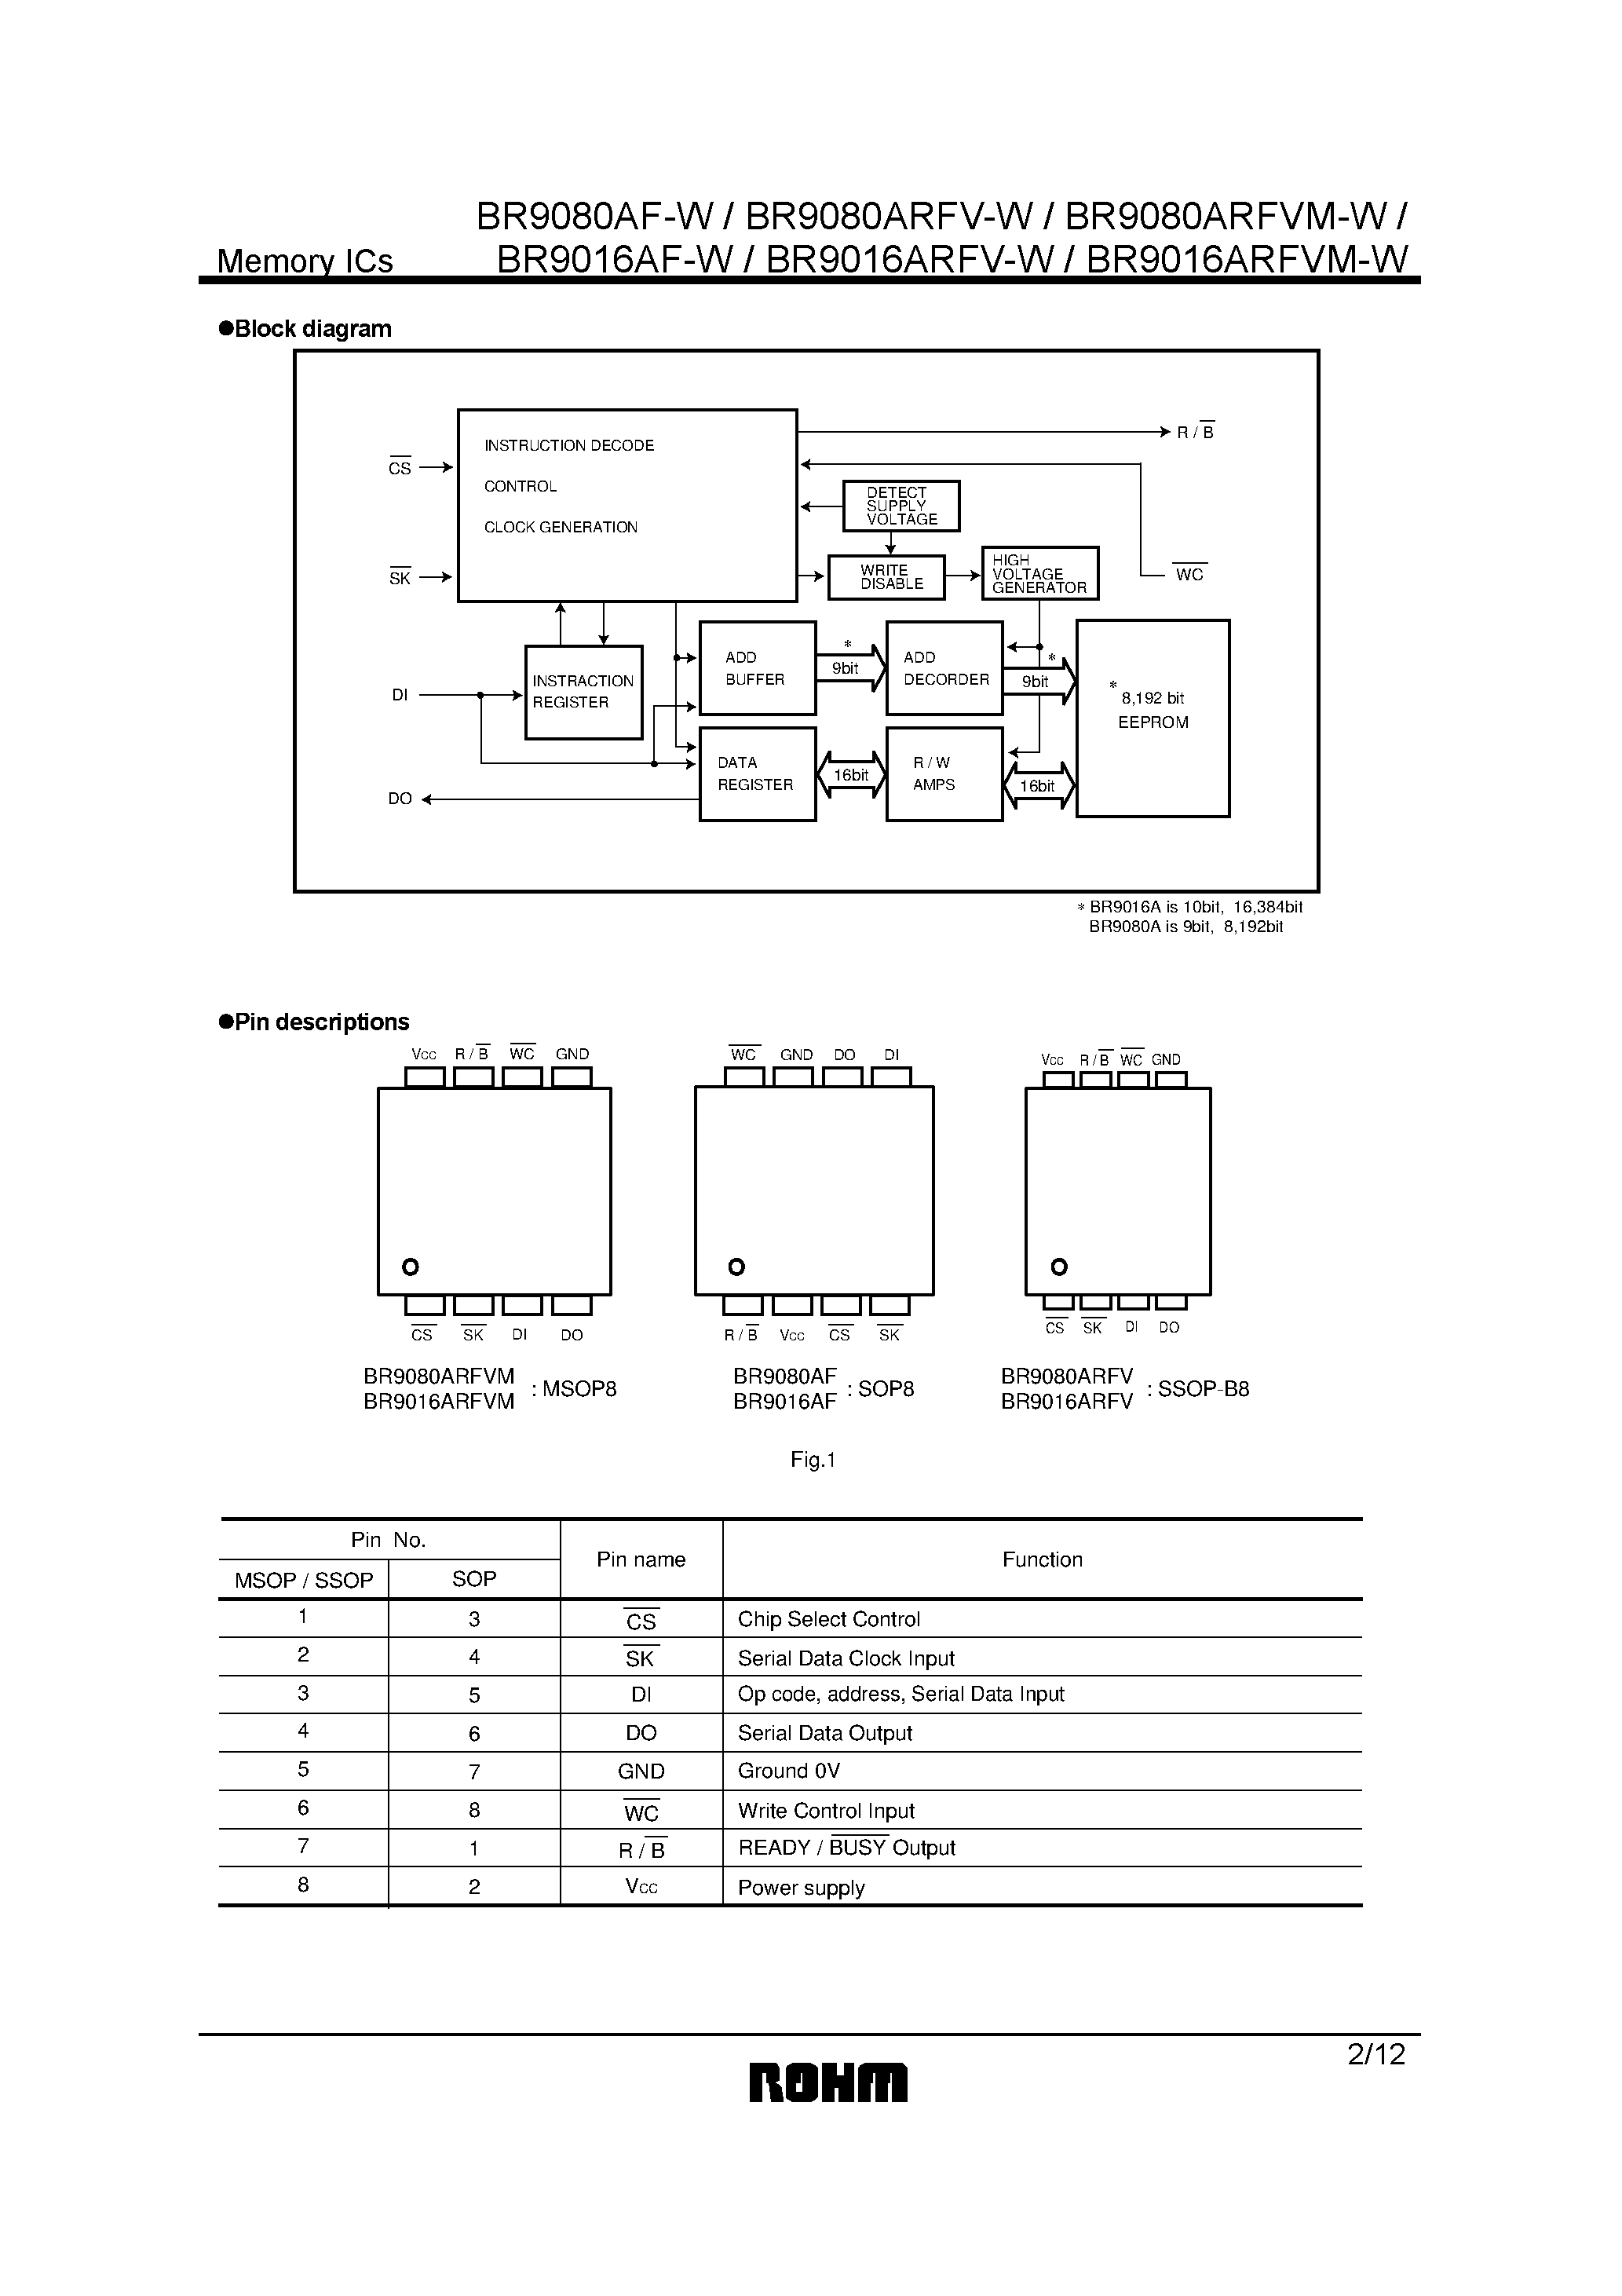 Datasheet BR9080ARFVM-W - 8k/ 16k bit EEPROMs for direct connection to serial ports page 2